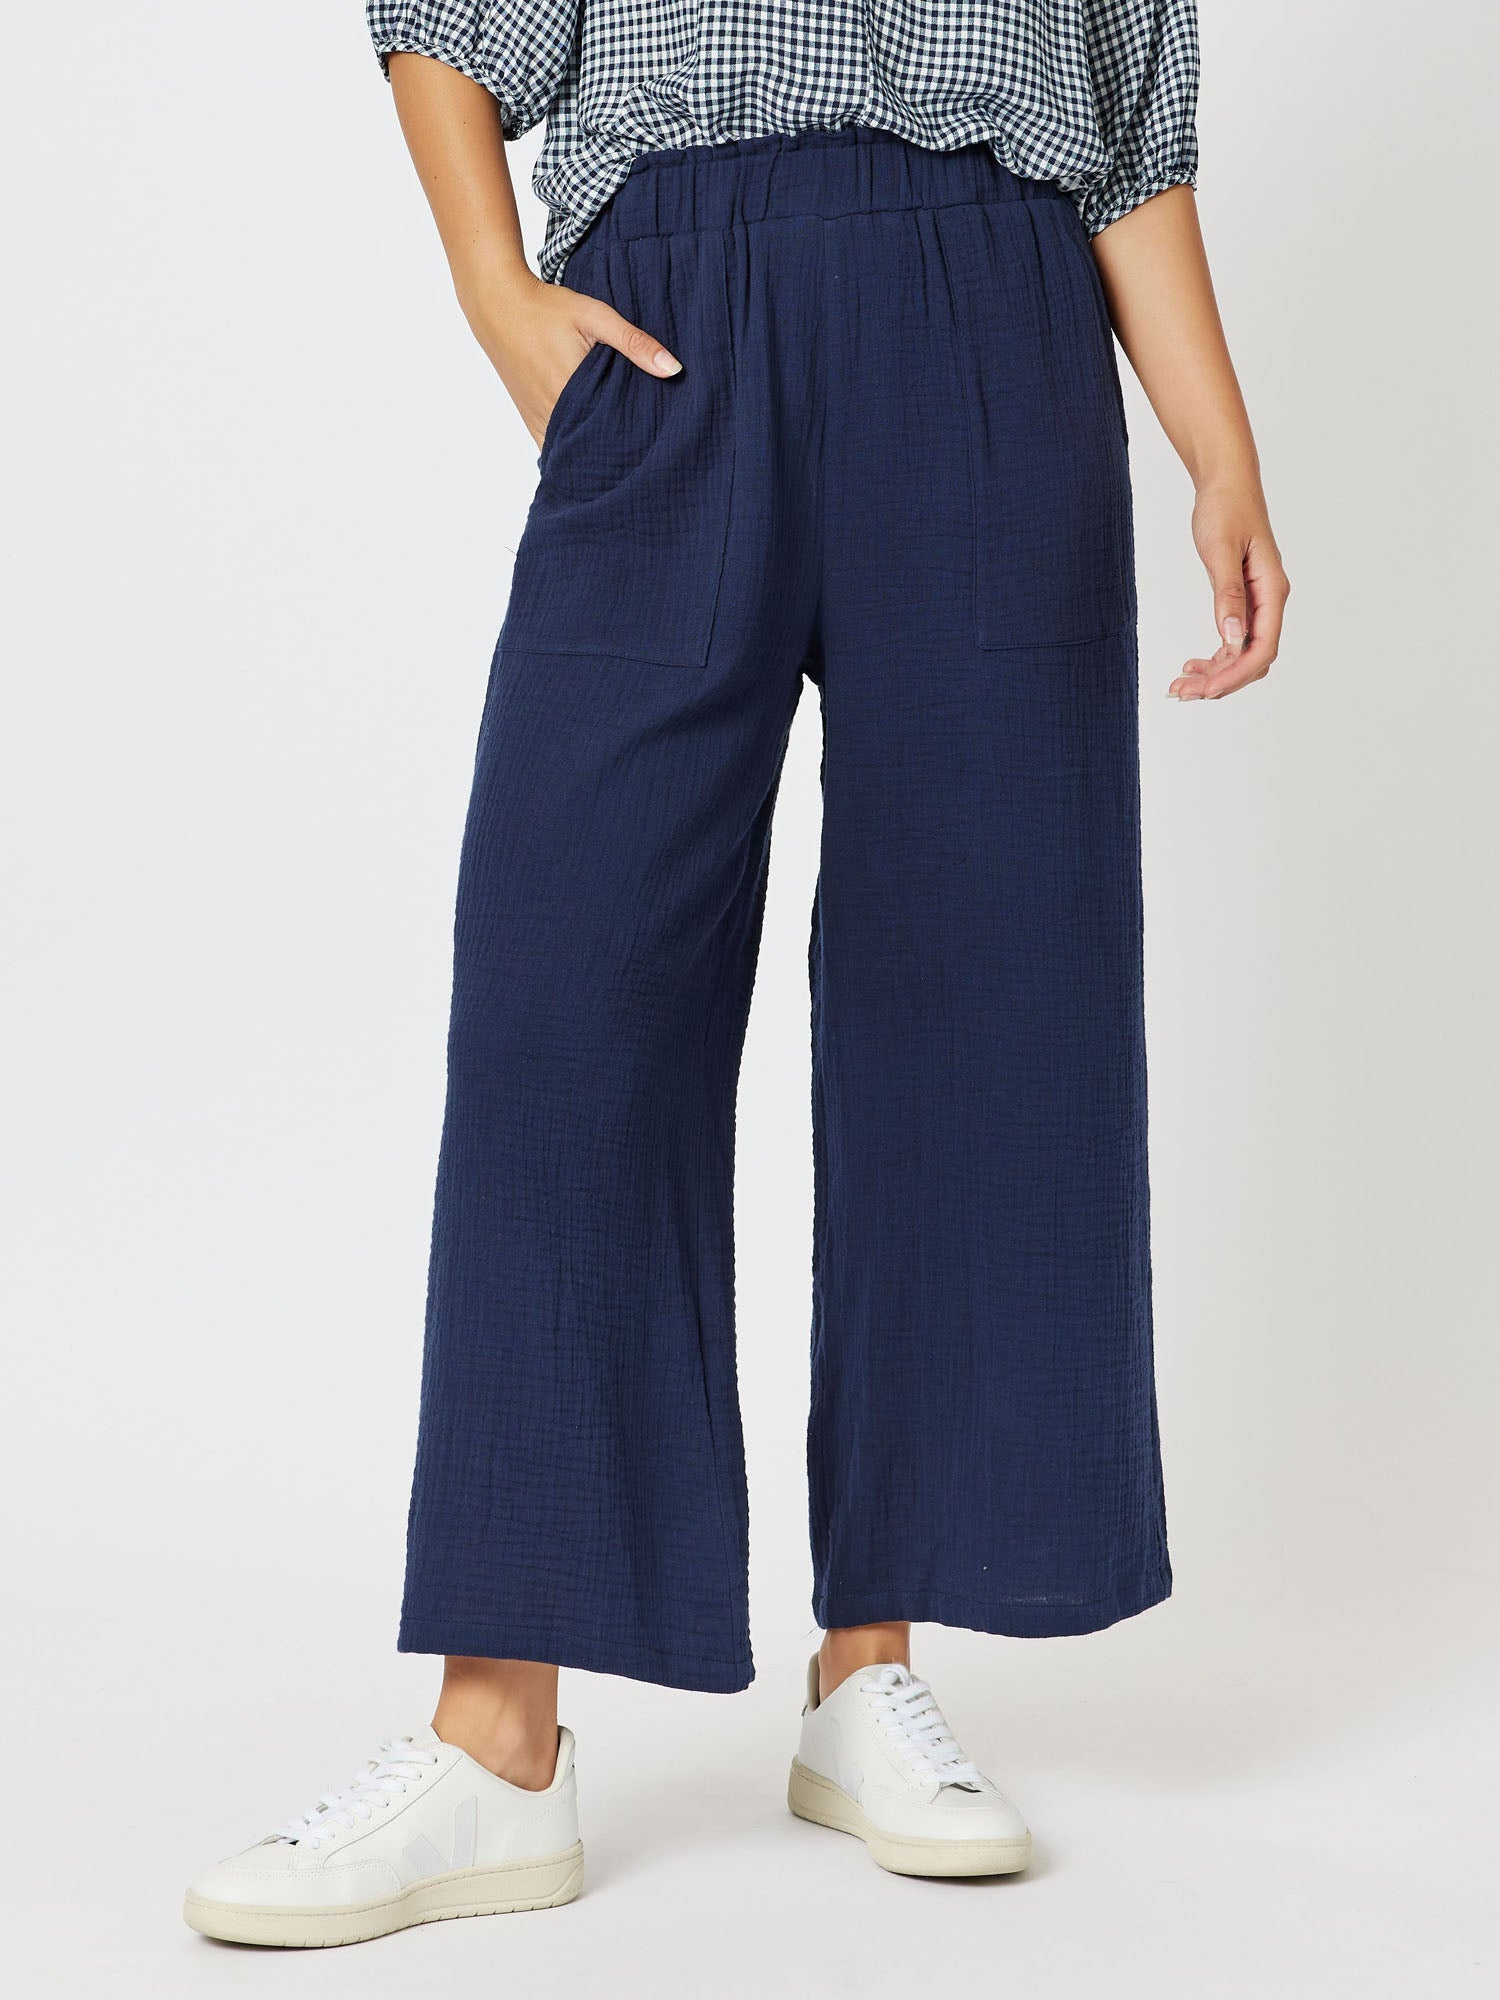 Byron Textured Cotton Wide Leg Pull On Pant - Navy